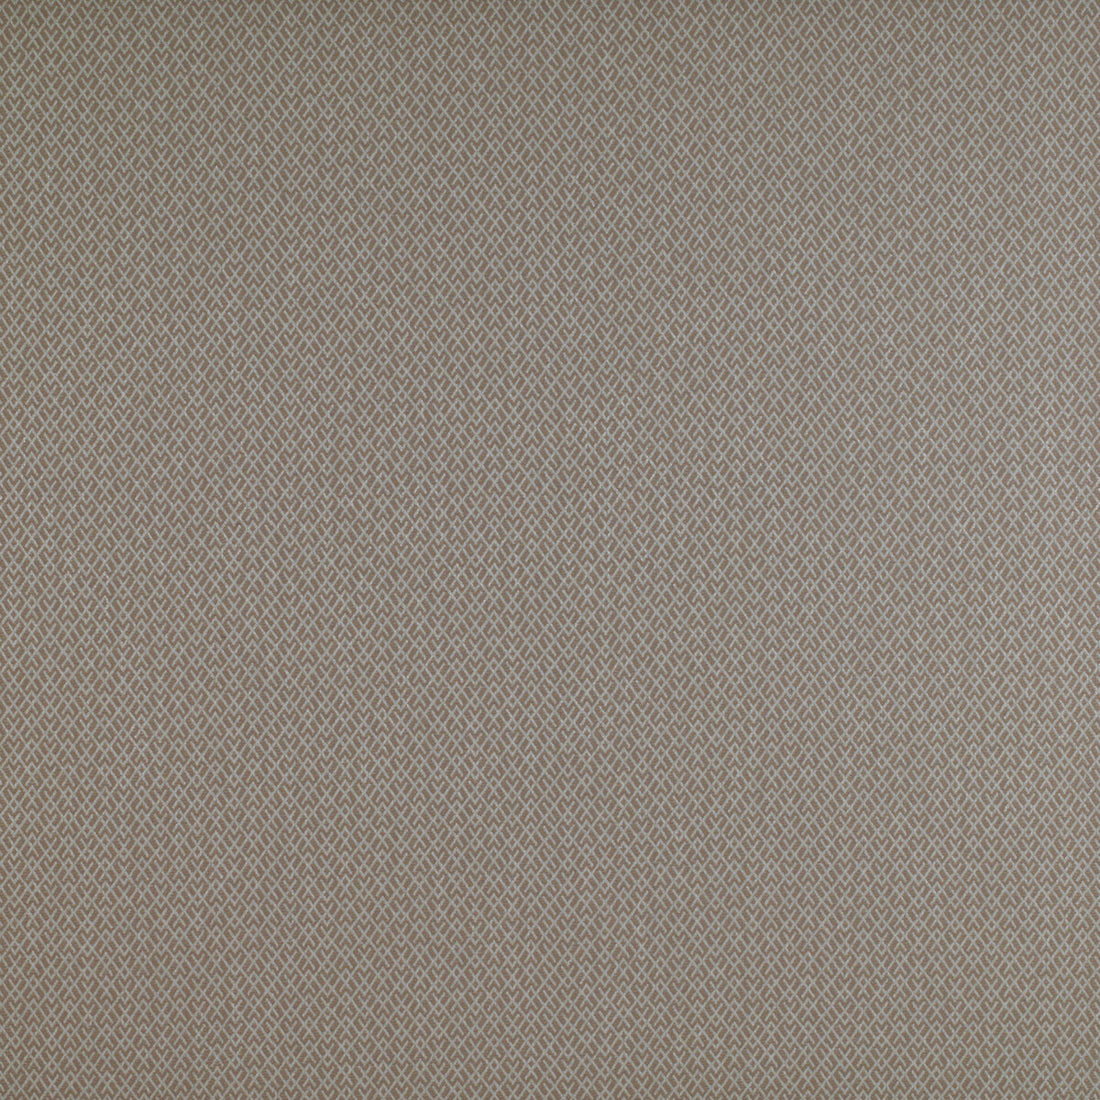 Chueca fabric in beige color - pattern GDT5205.005.0 - by Gaston y Daniela in the Madrid collection